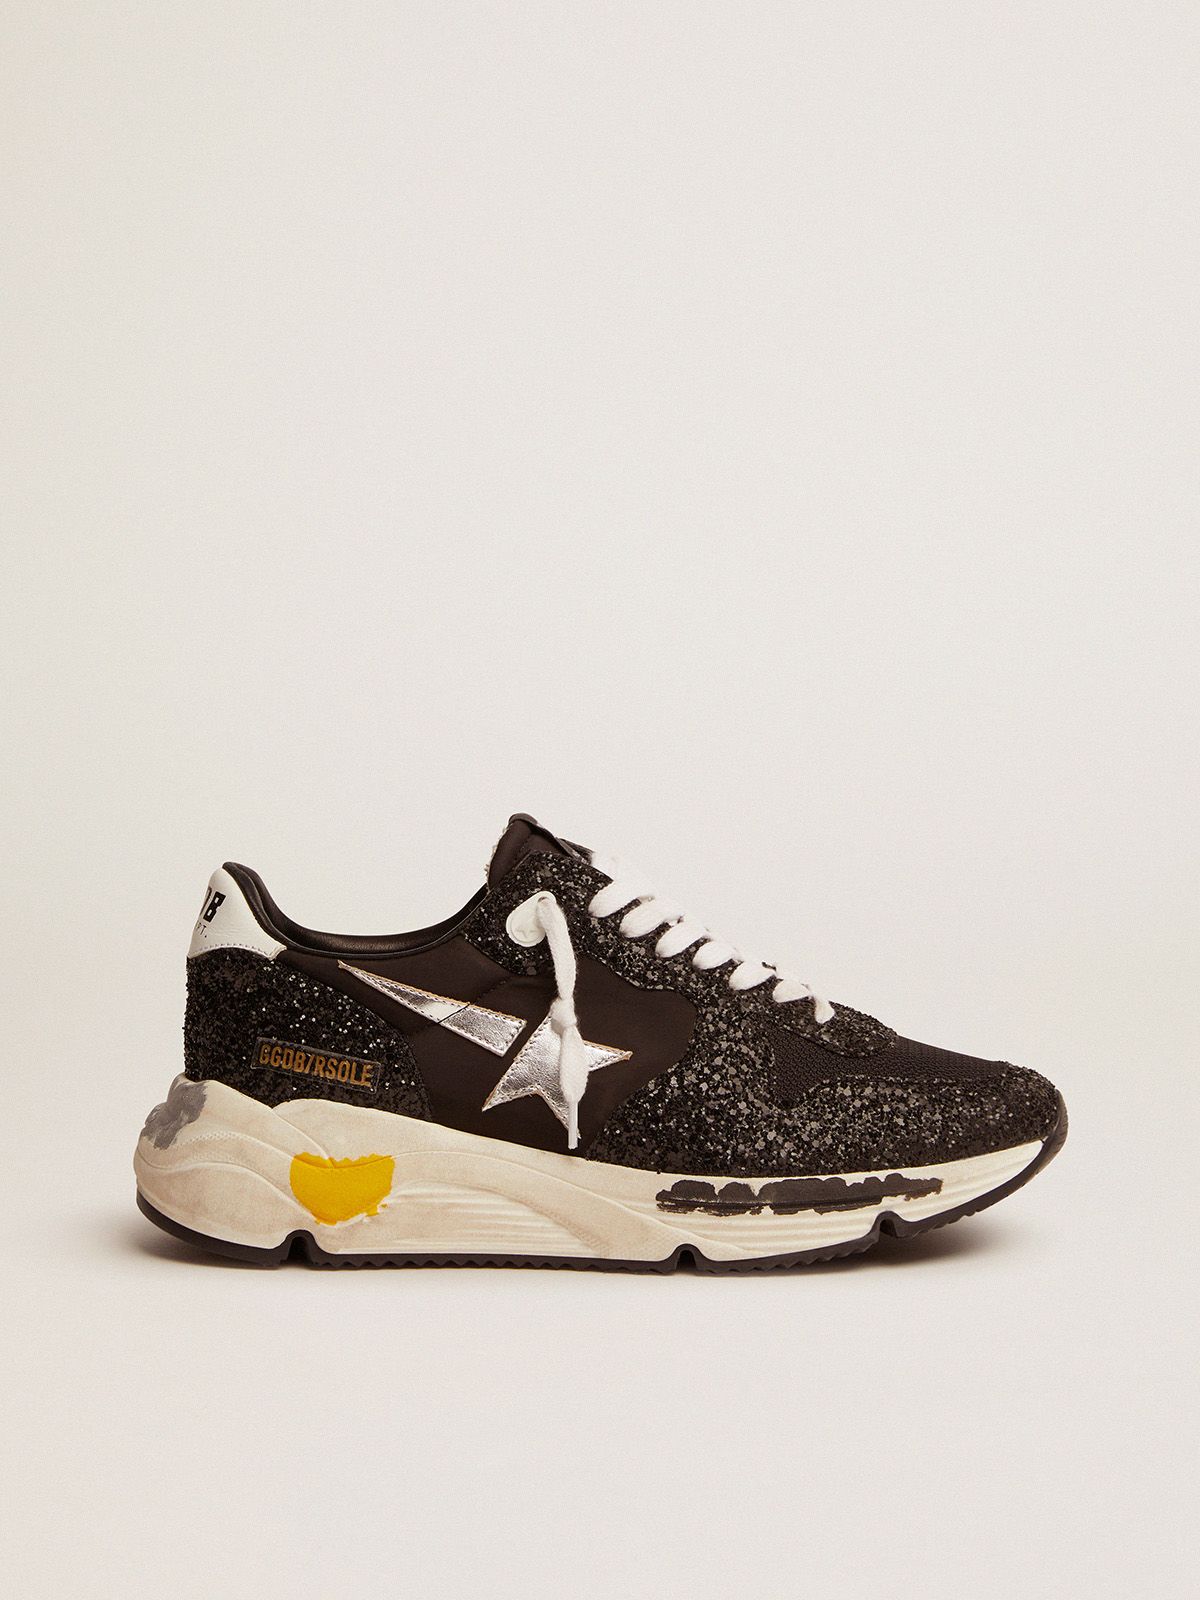 golden goose silver laminated Running leather in and black with glitter sneakers nylon star Sole